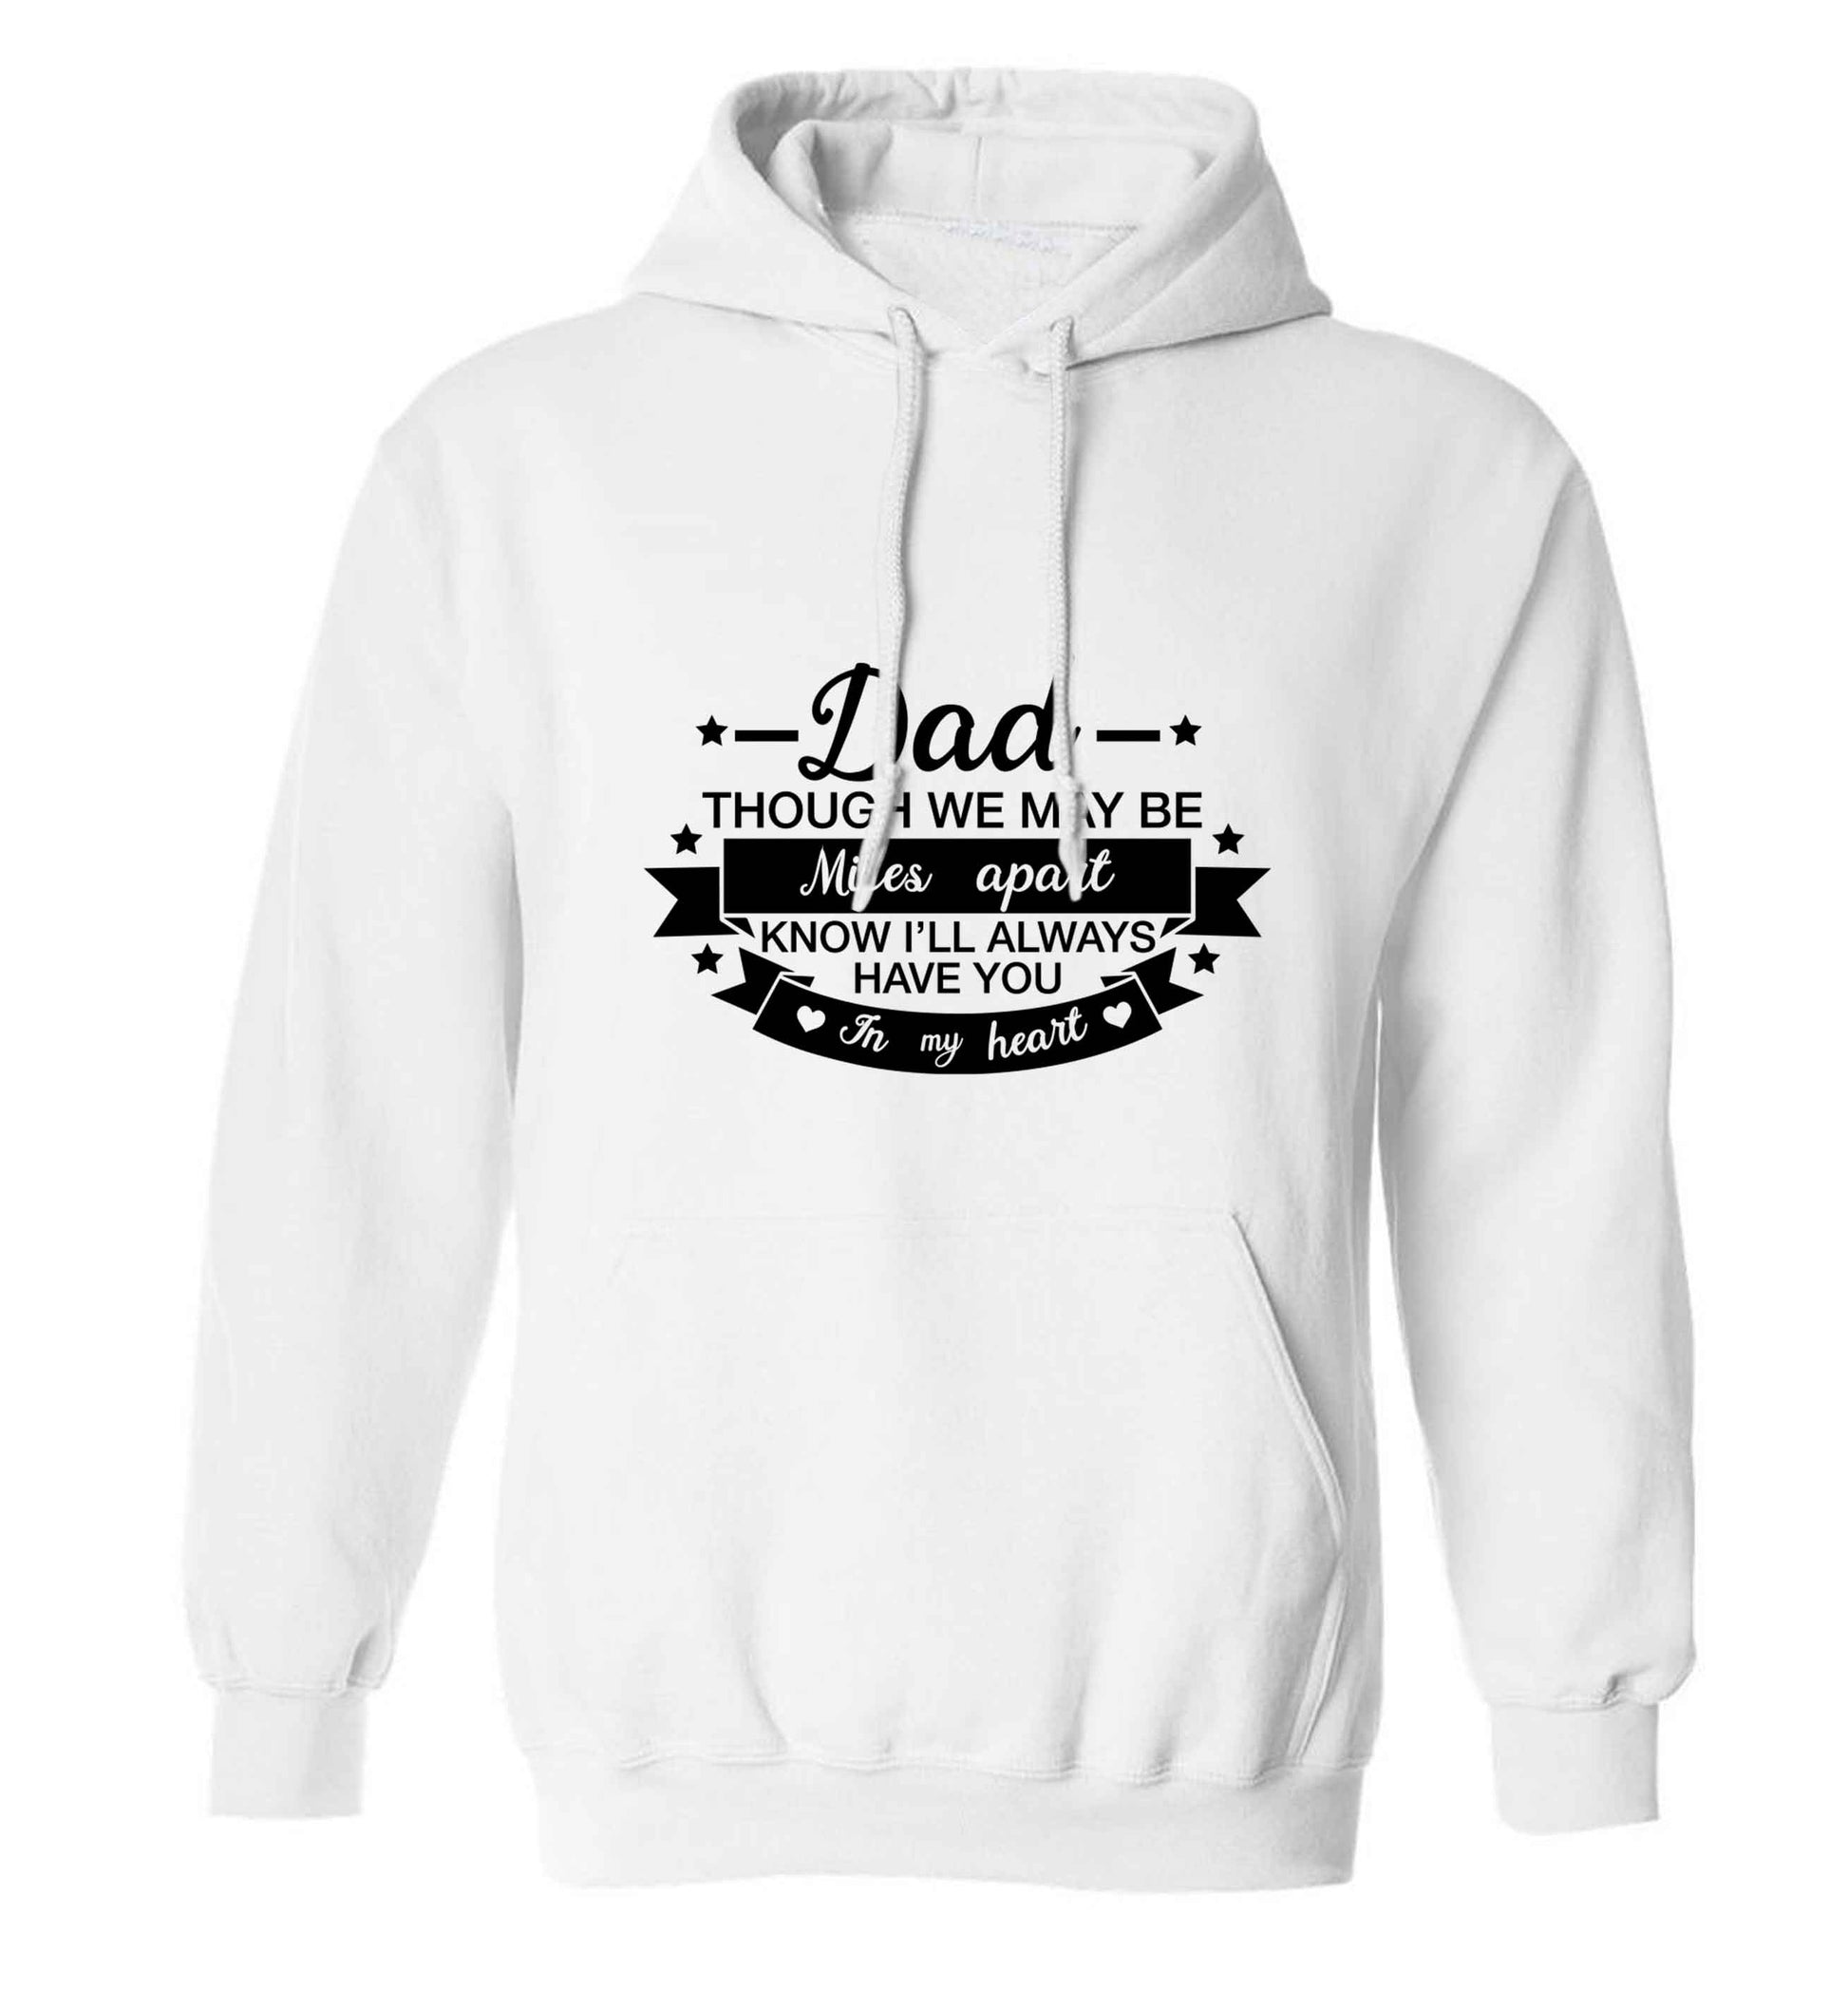 Dad though we are miles apart know I'll always have you in my heart adults unisex white hoodie 2XL